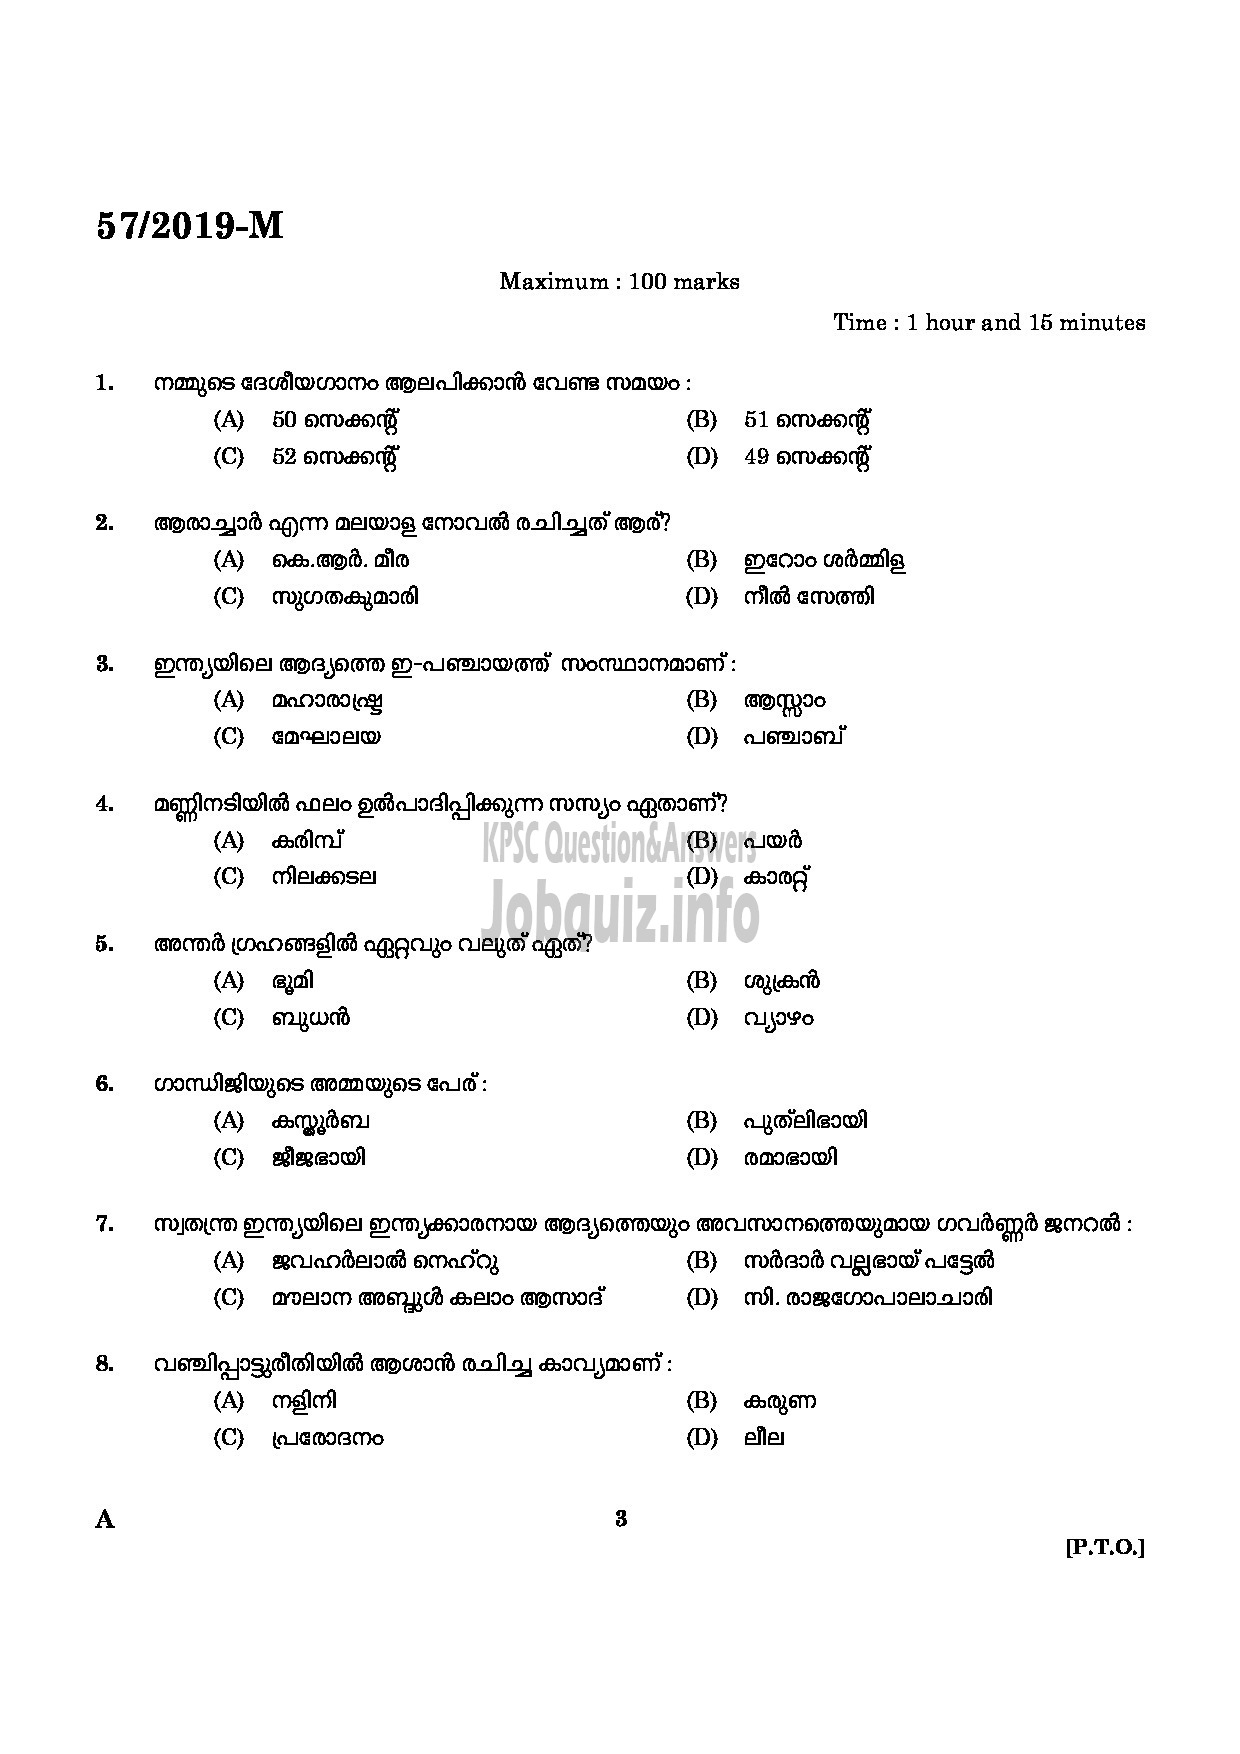 Kerala PSC Question Paper - POWER LAUNDRY ATTENDER MEDICAL EDUCATION MALAYALAM-1